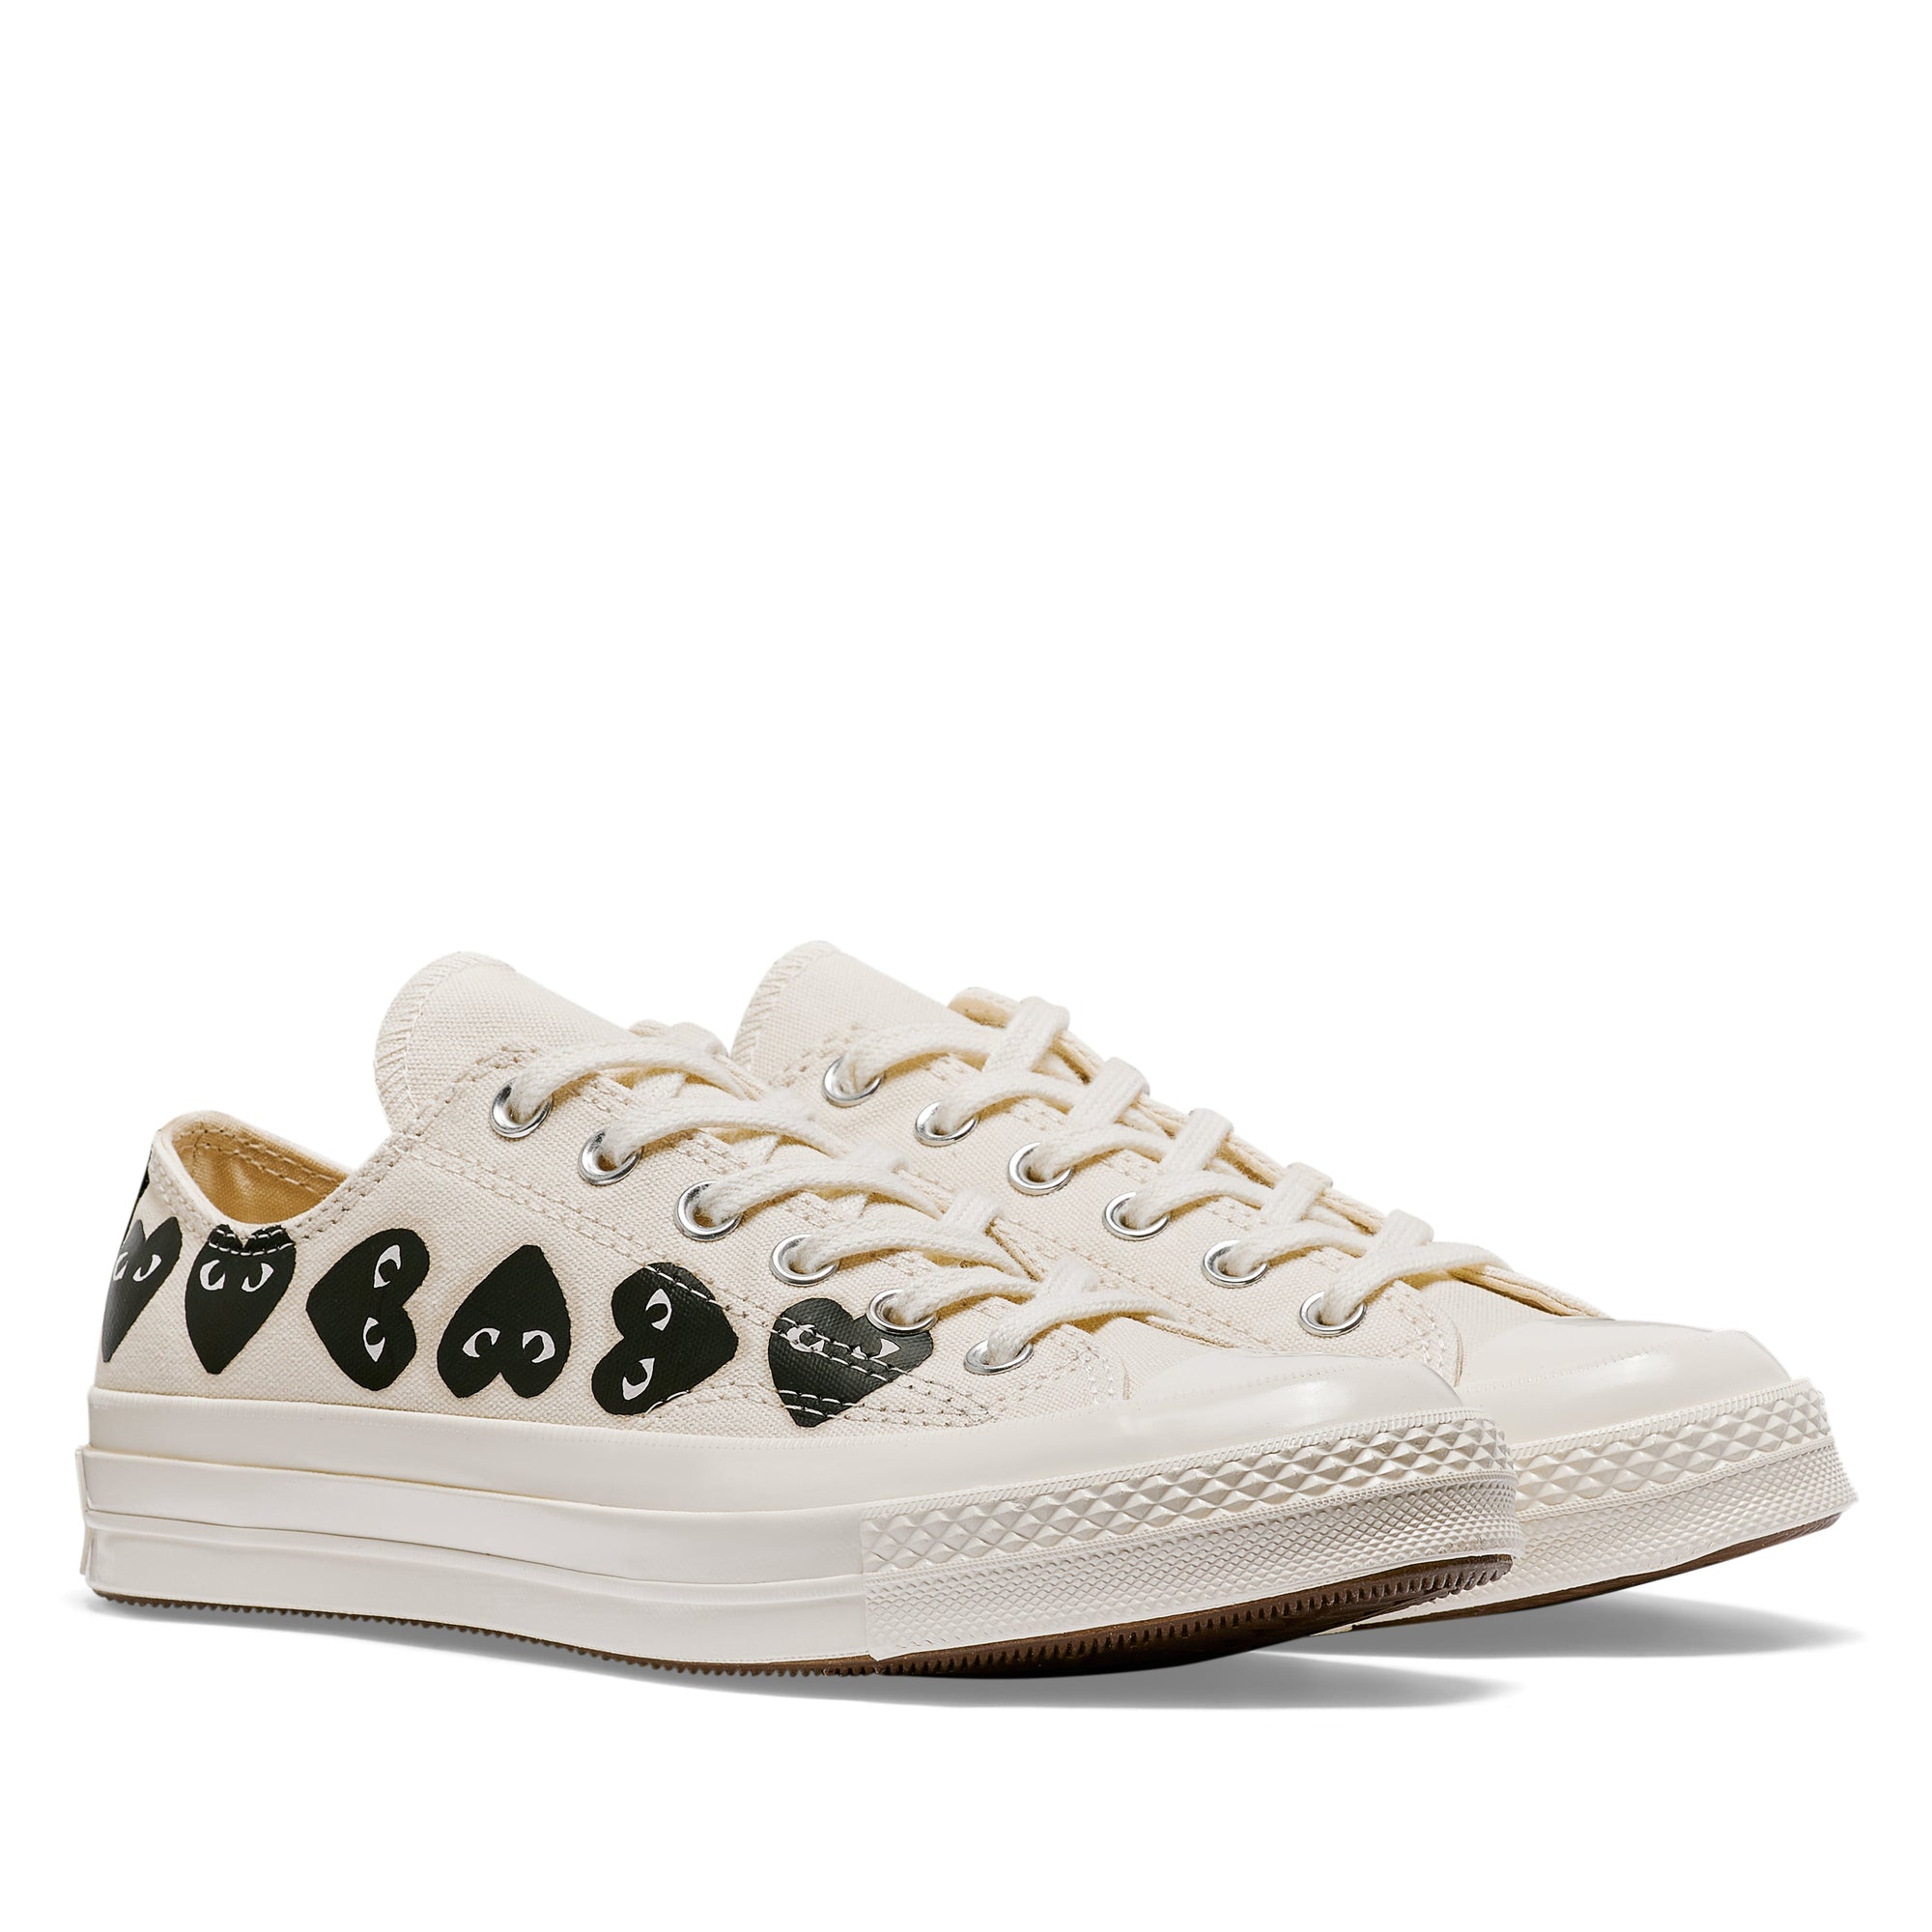 Play Converse - Multi Black Heart Chuck Taylor All Star '70 Low Sneakers - (Beige) view 3